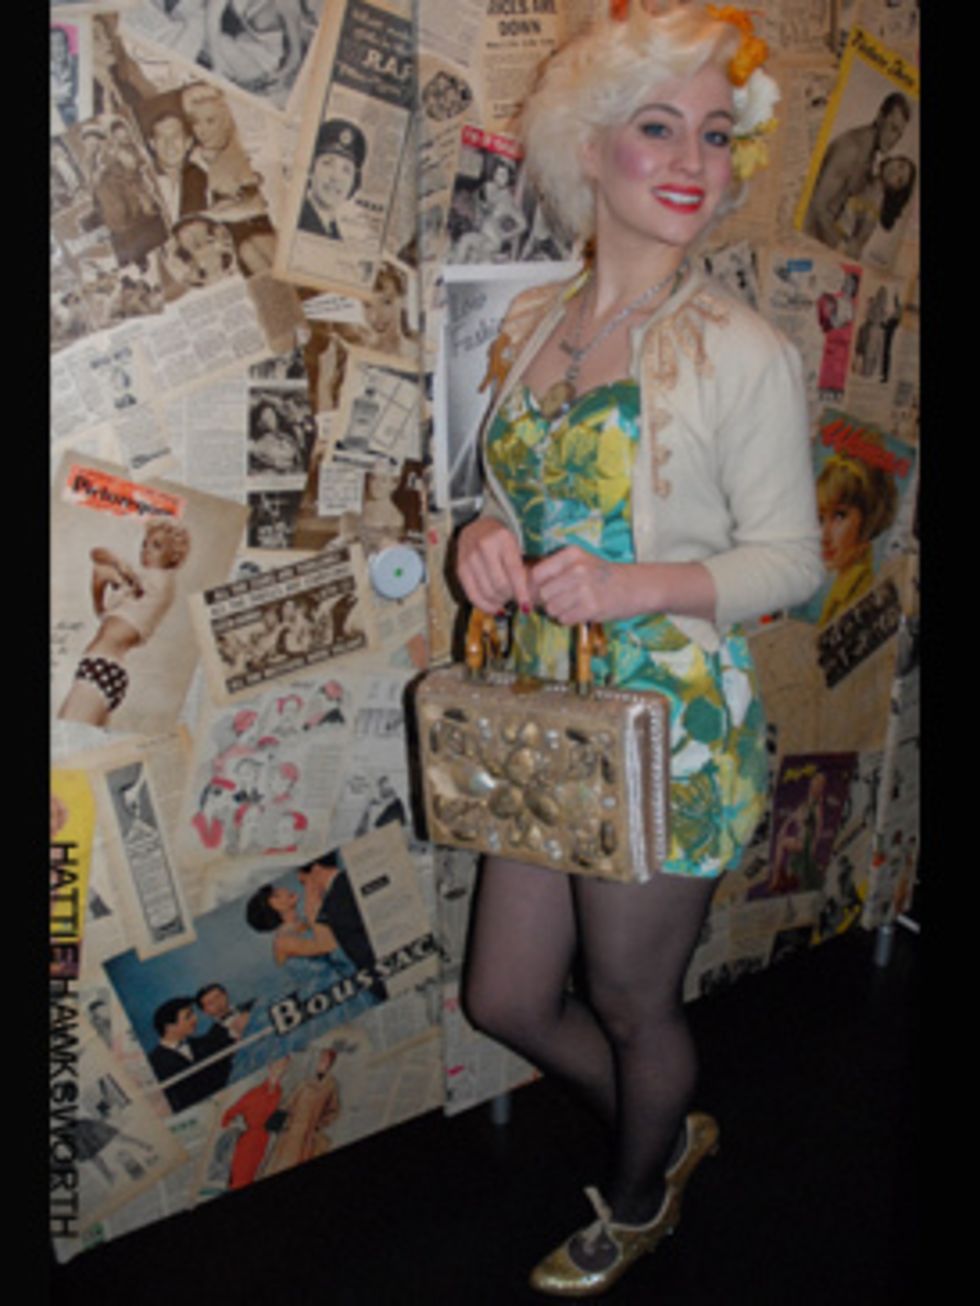 <p>Hannah, 23, from London- <strong>Update any dress</strong> with a 50s silhouette. I have the perfect waist clincher belt and bullet bra inserts from What Katie Did in Portobello Road.- <strong>Do your homework</strong>. Look in old design books, thi